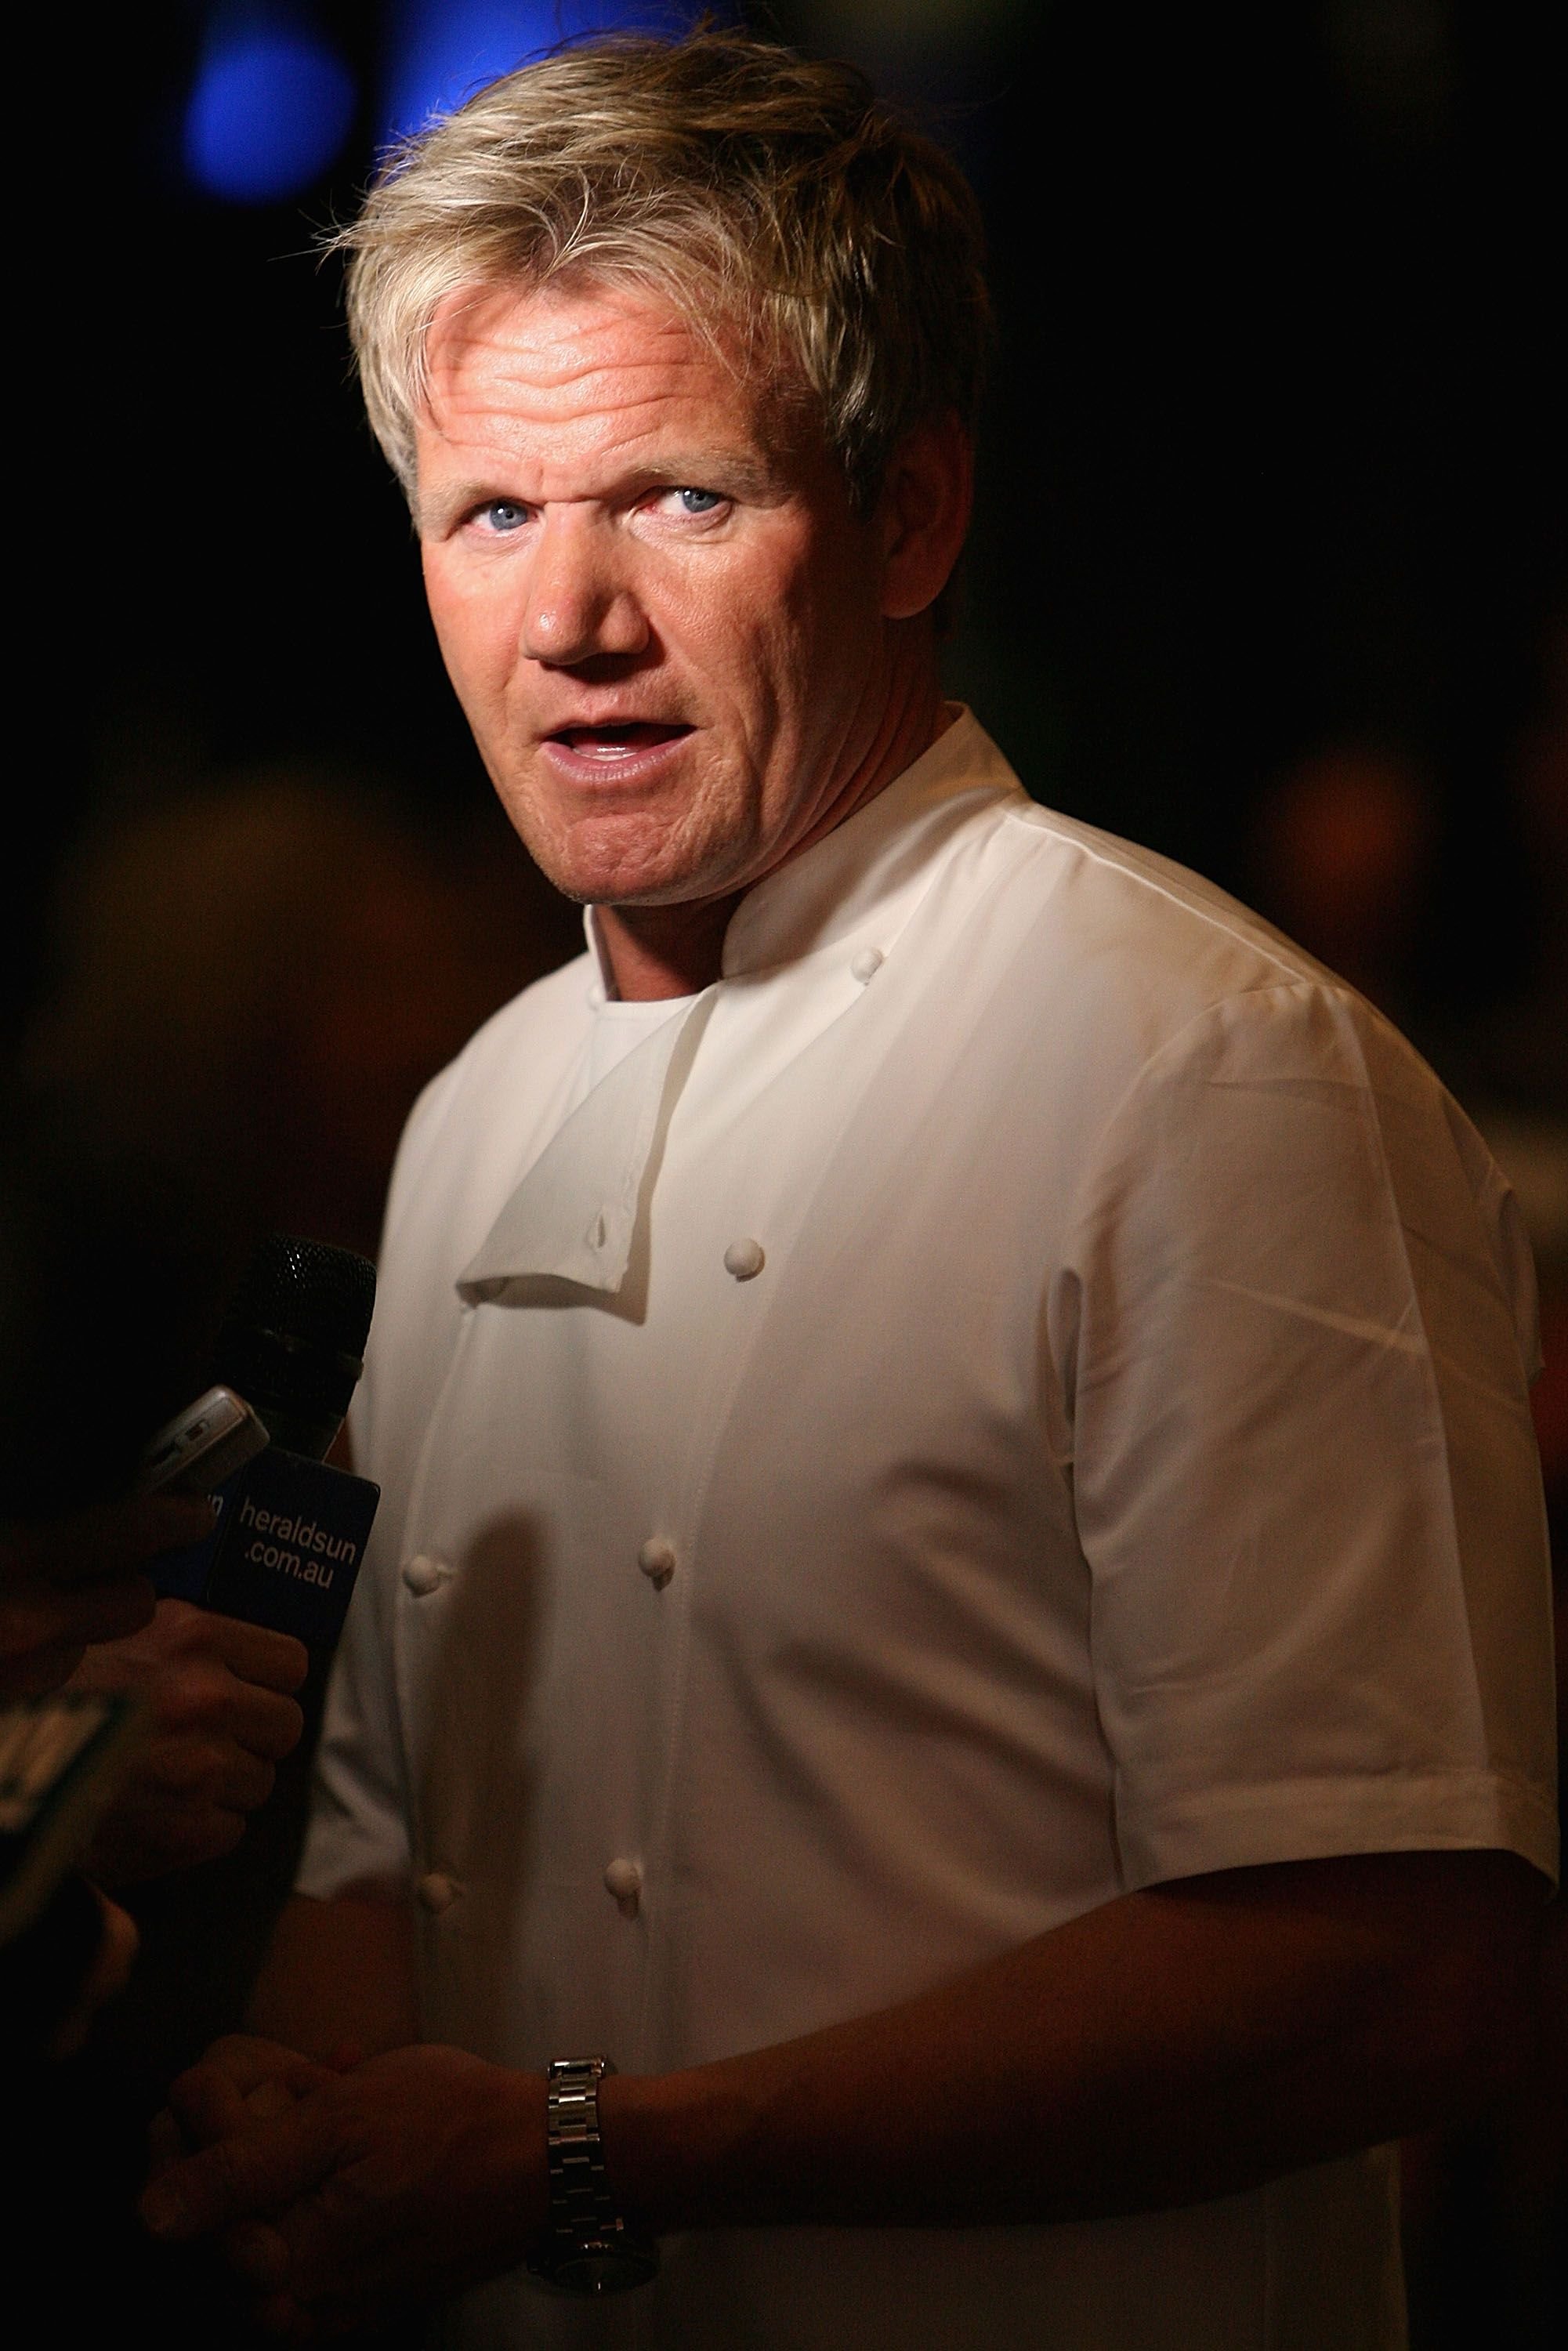 Gordon Ramsay during the opening party of the Crown Metropol hotel on April 21, 2010 in Melbourne, Australia. | Source: Getty Images